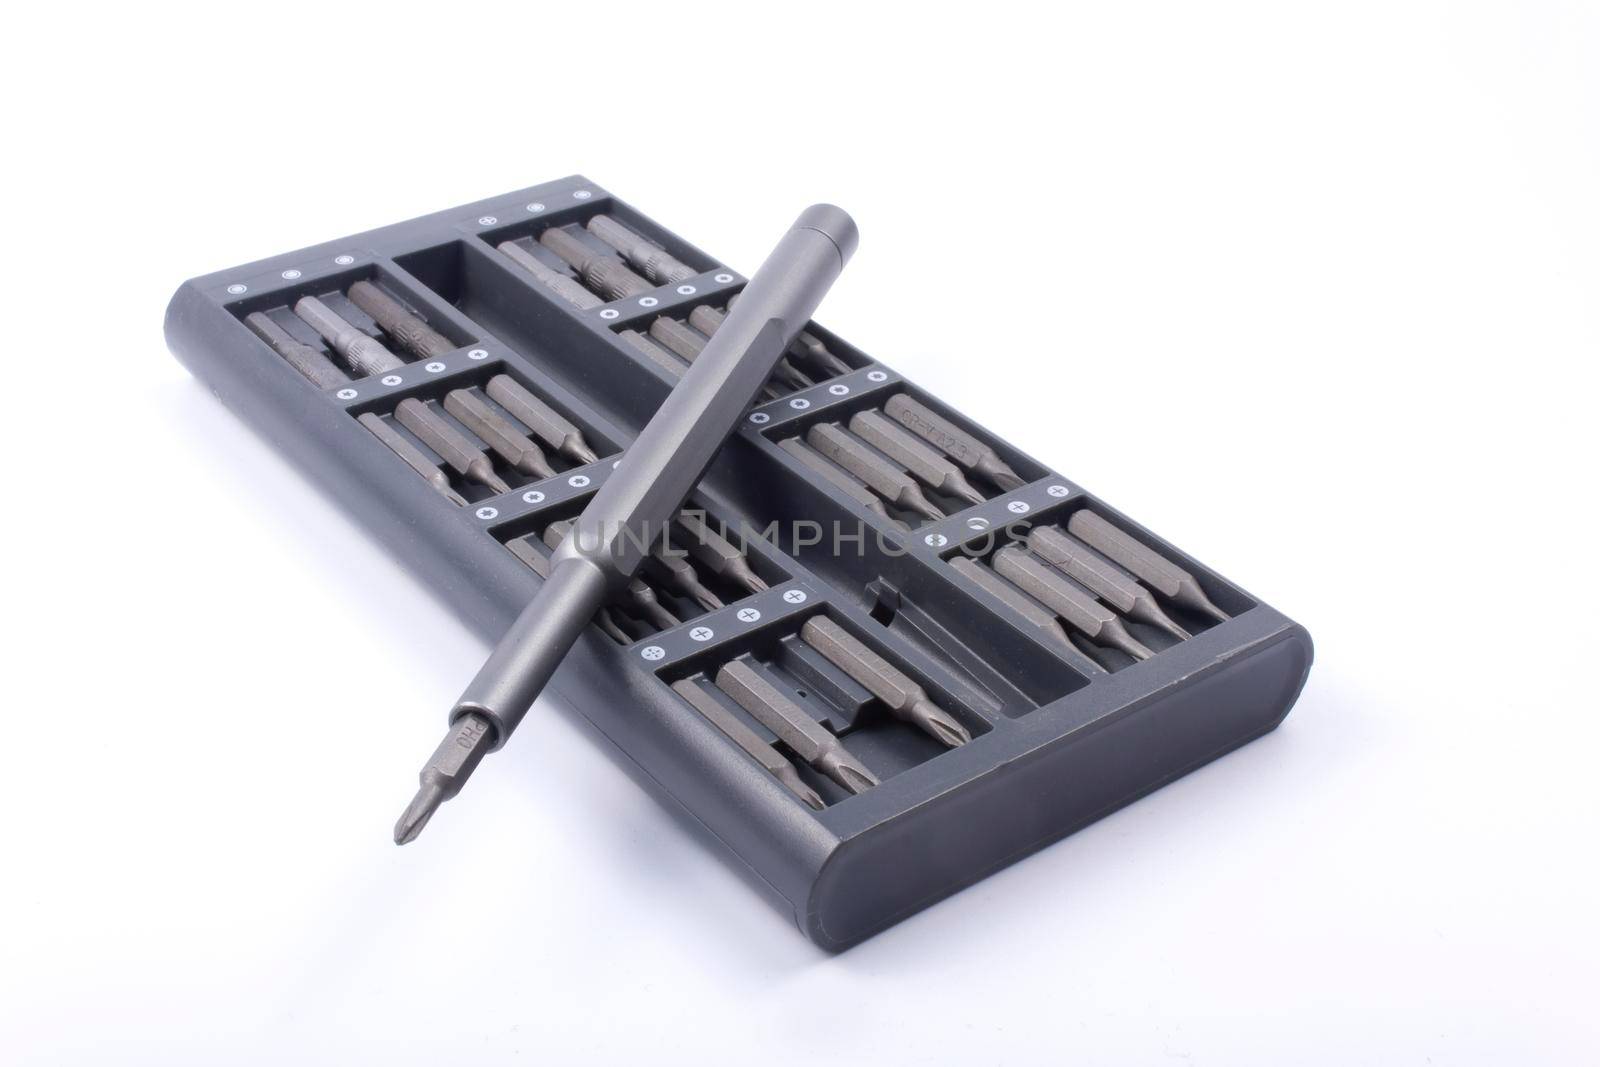 Precision metal, gray screwdriver and a set of interchangeable bits in a dedicated box on a white background